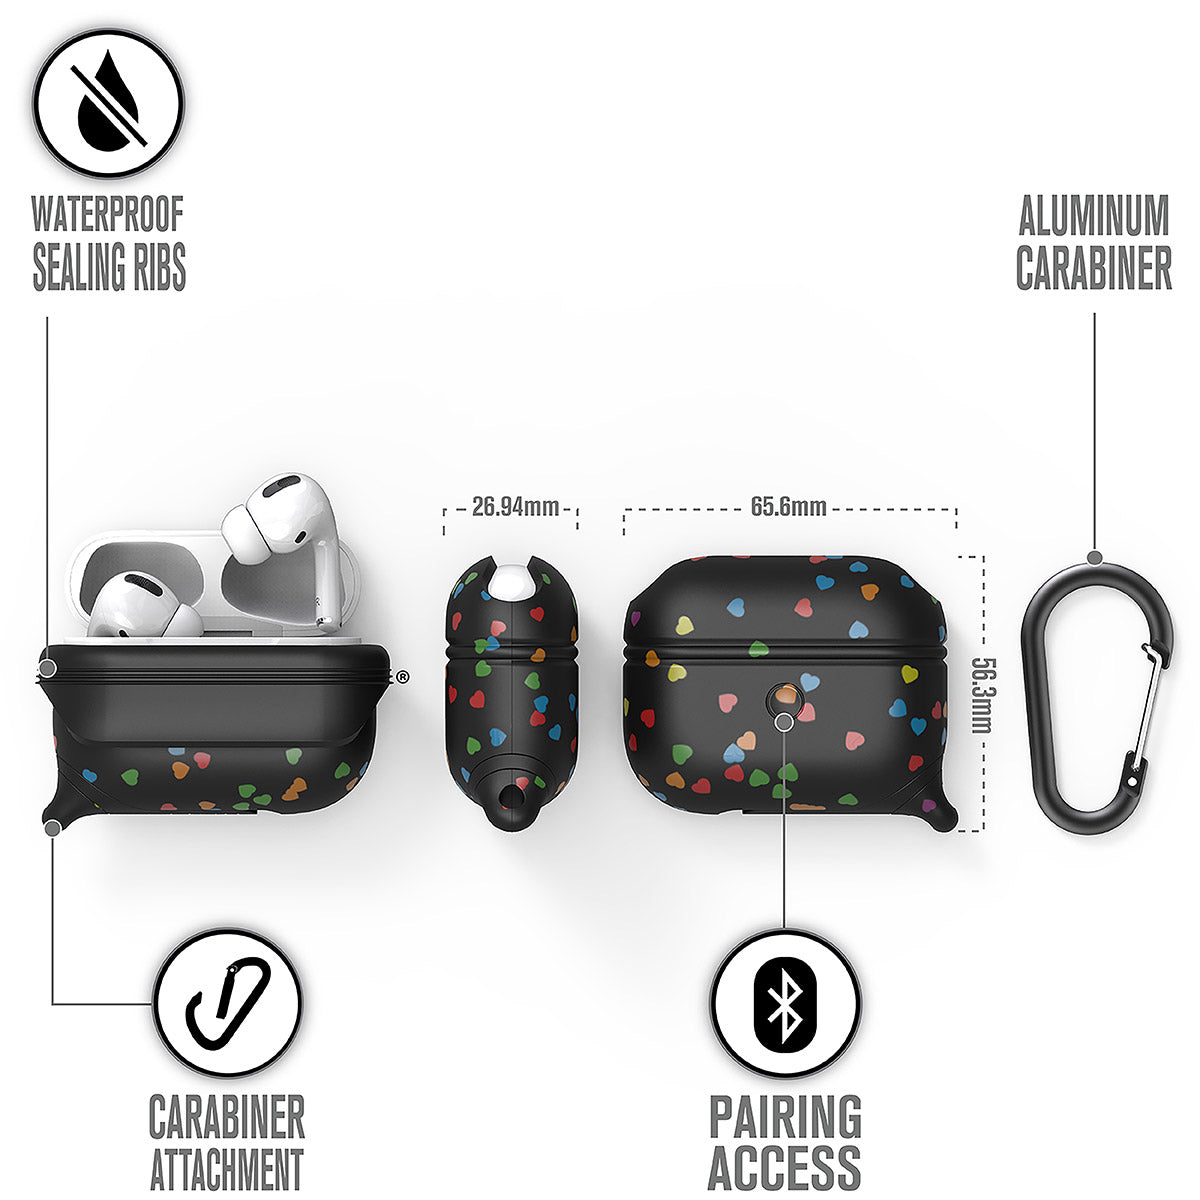 CATAPLAPDPROHTB | catalyst airpods pro gen 2 1 waterproof case carabiner special edition black with hearts different views showing the sealing ribs carabiner attachment loop and pairing access text reads waterproof sealing ribs aluminum carabiner carabiner attachment pairing access